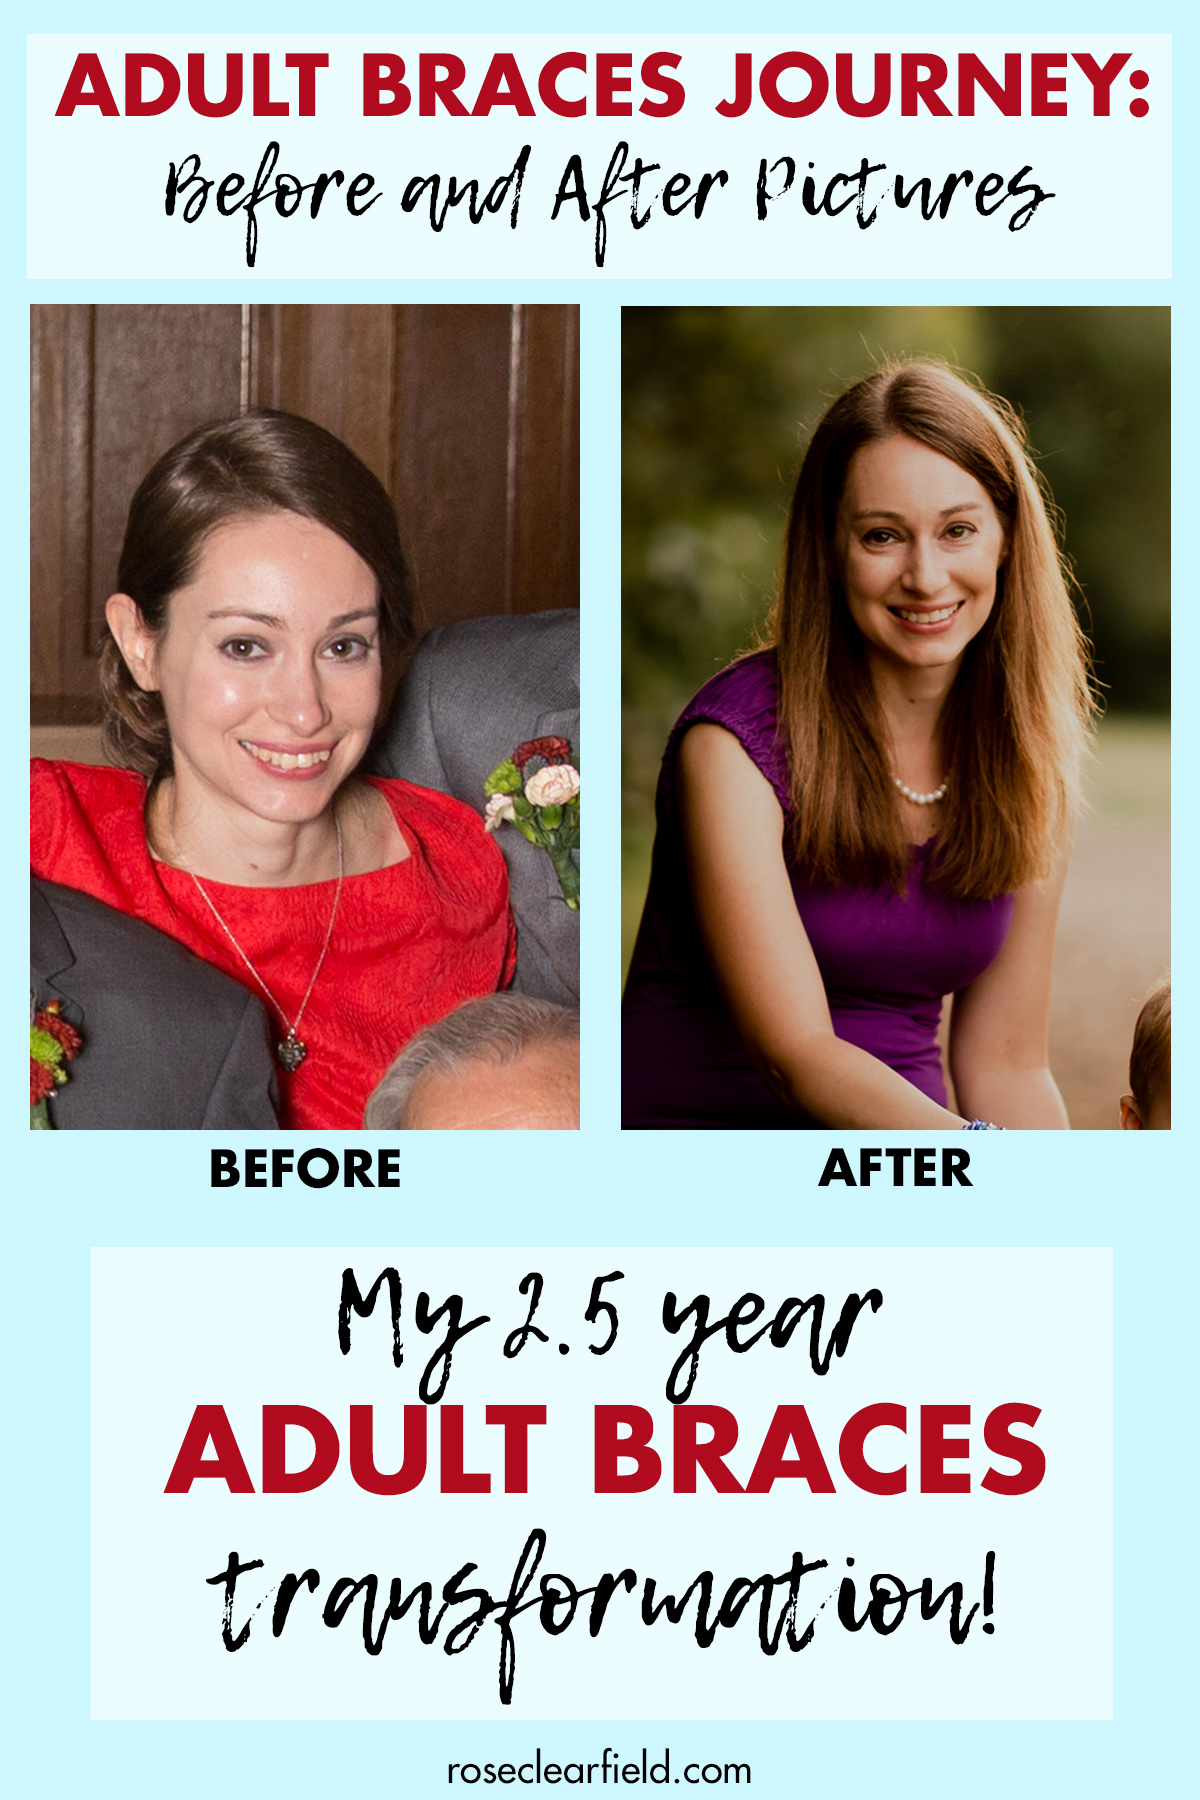 before and after braces adults